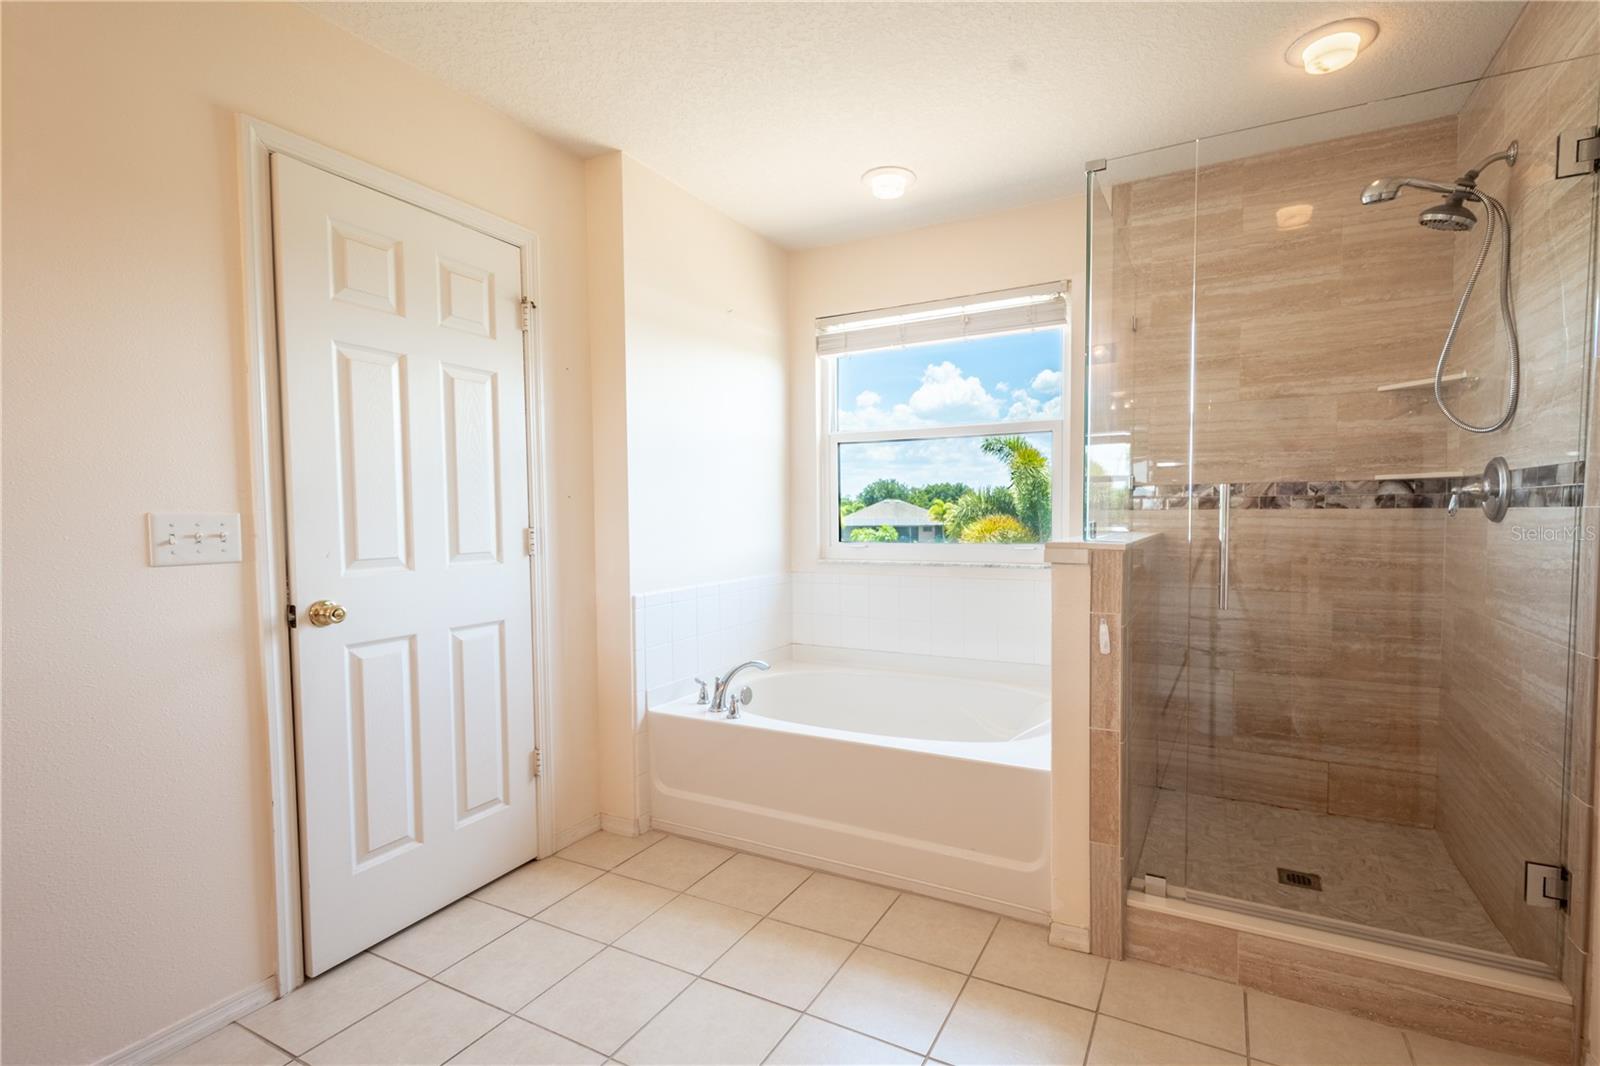 The primary ensuite bath features a tiled, glass enclosed walk-in shower, and a separate bathtub.